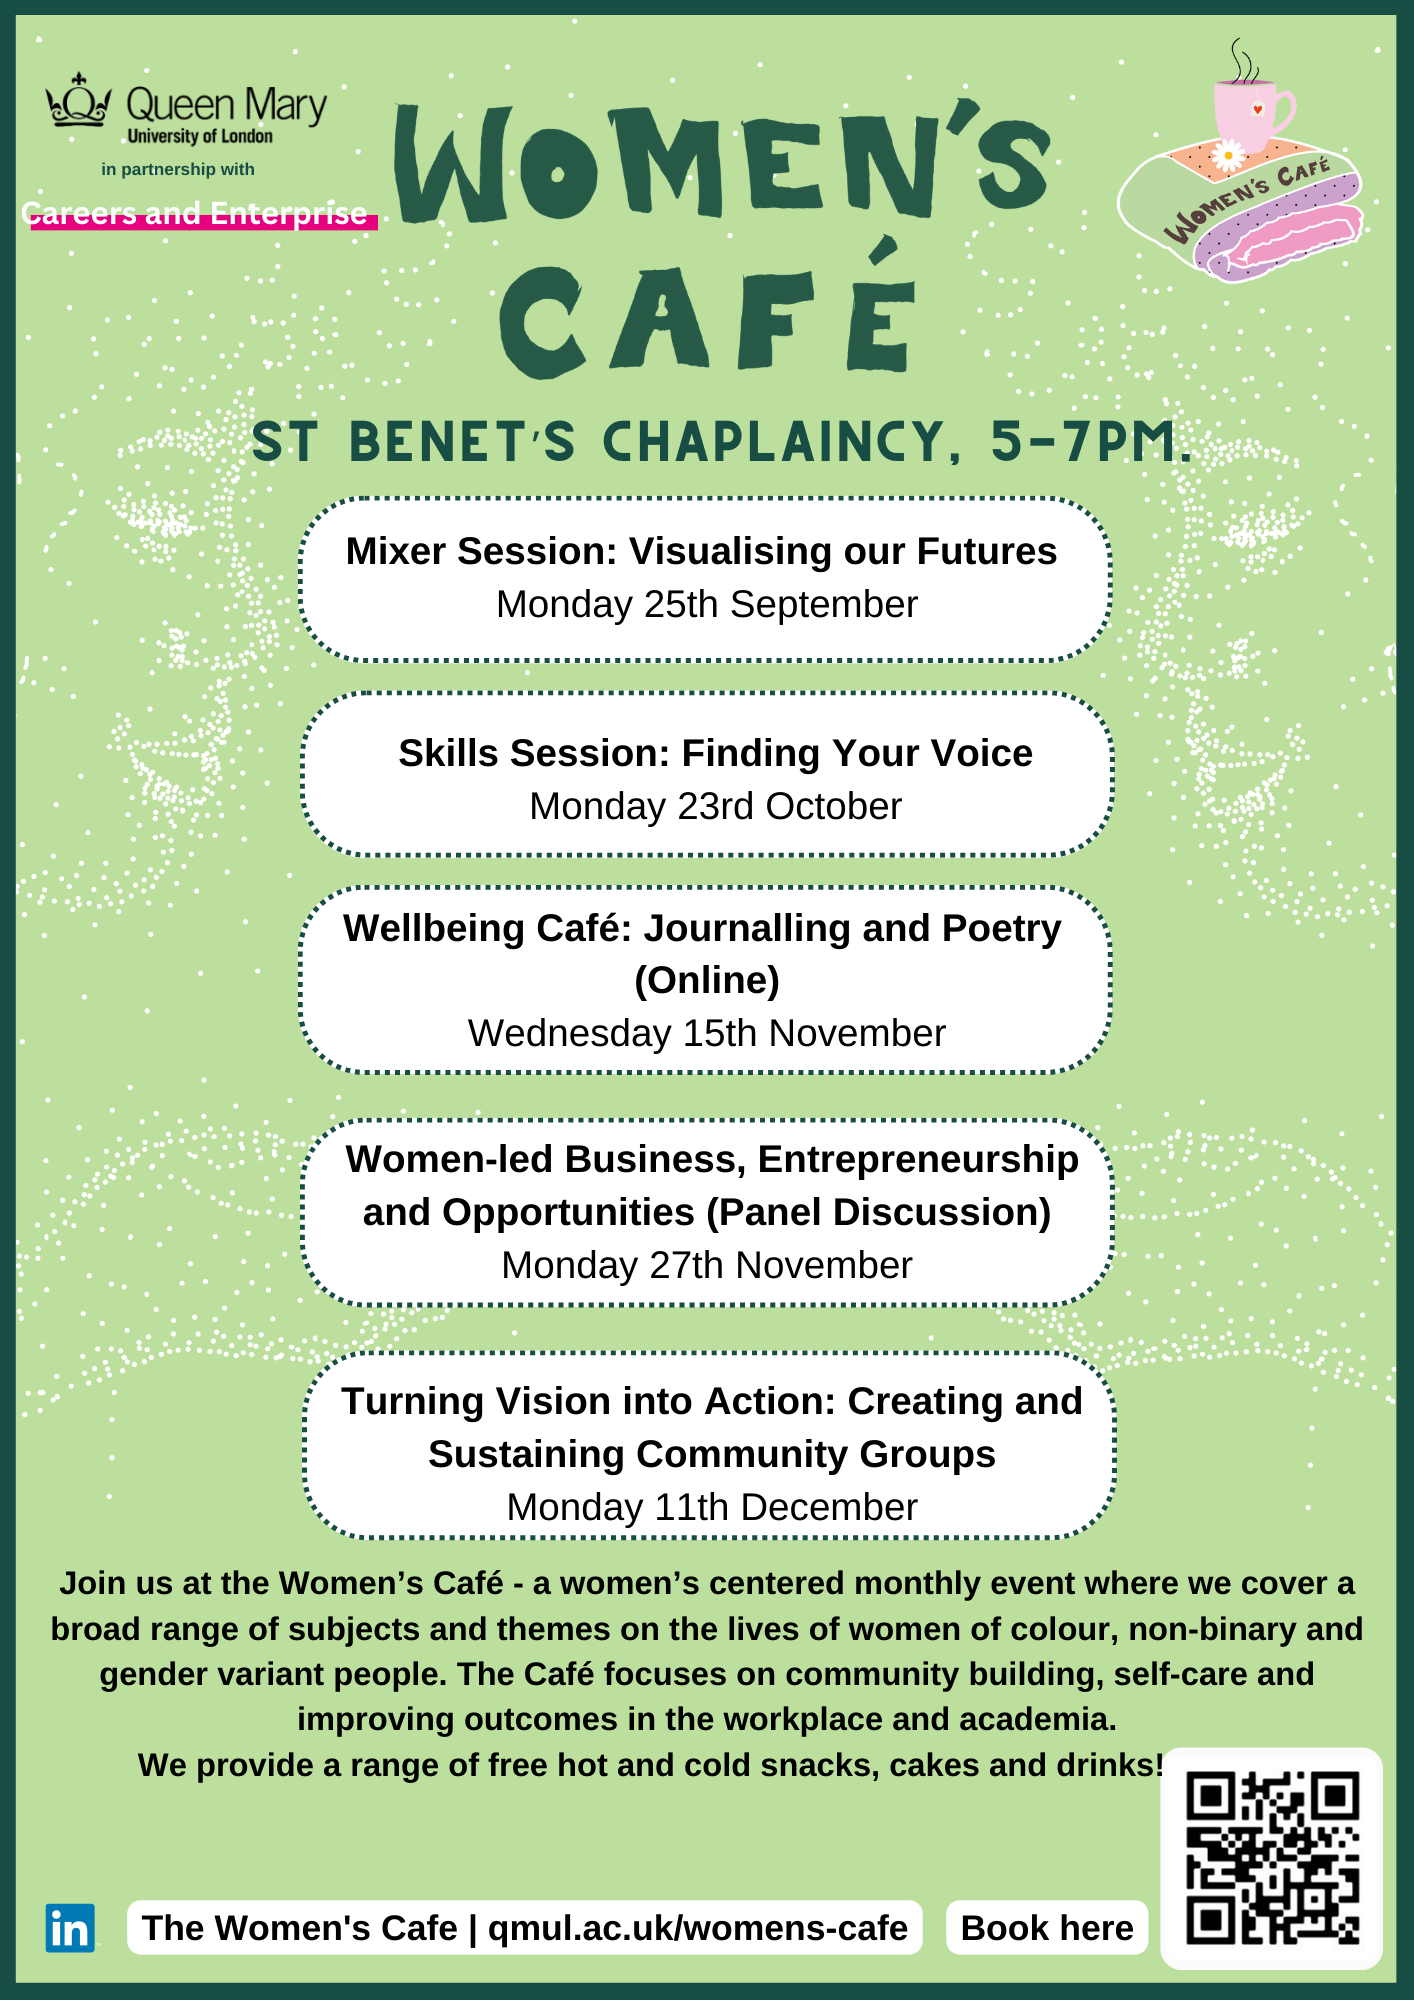 A poster showing the dates and times for different events run as part of the Breakthrough Women's Careers Café